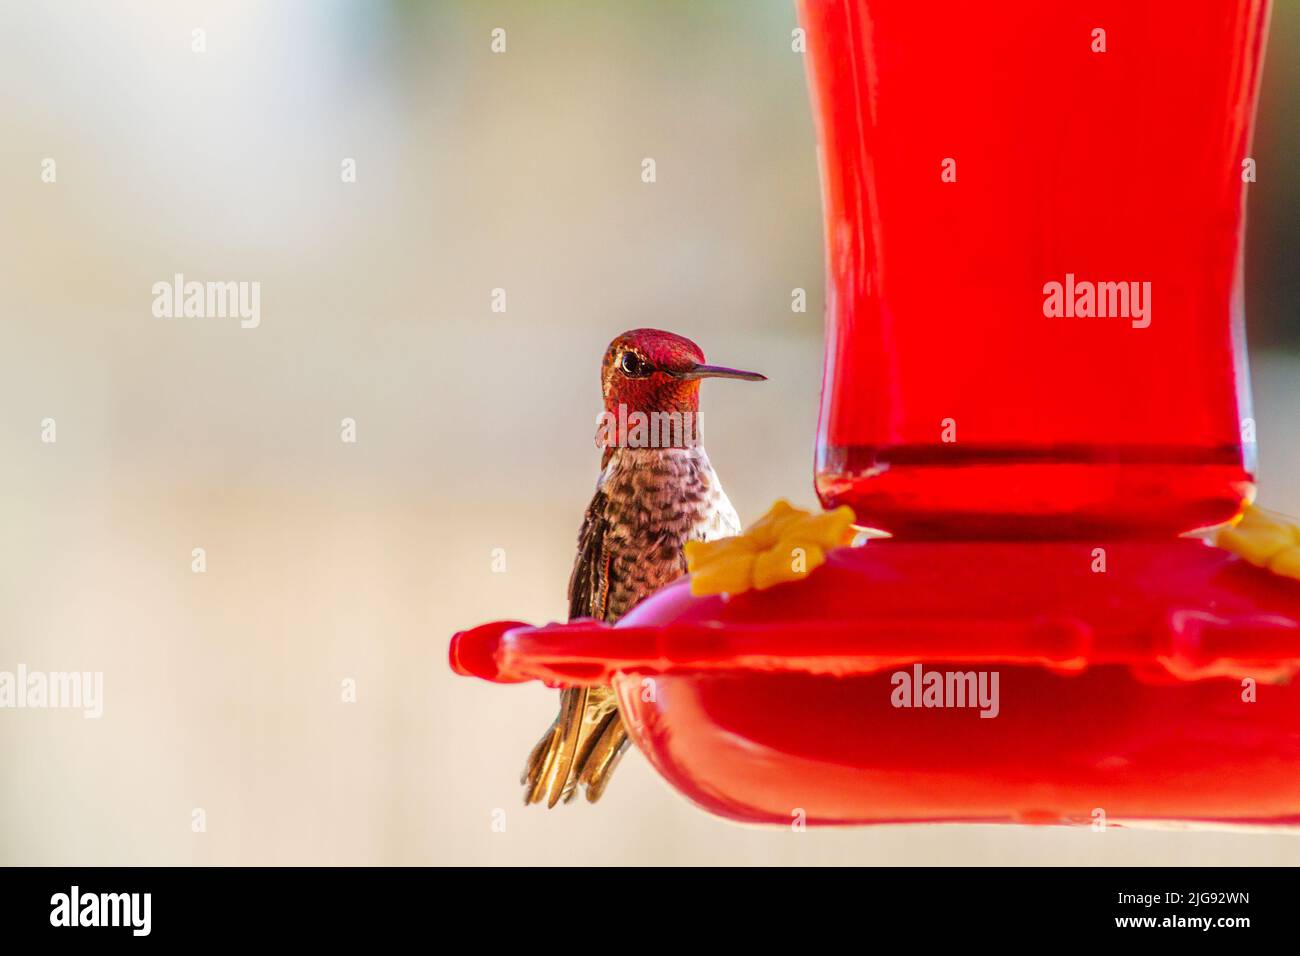 Hummingbird perched at a red feeder Stock Photo